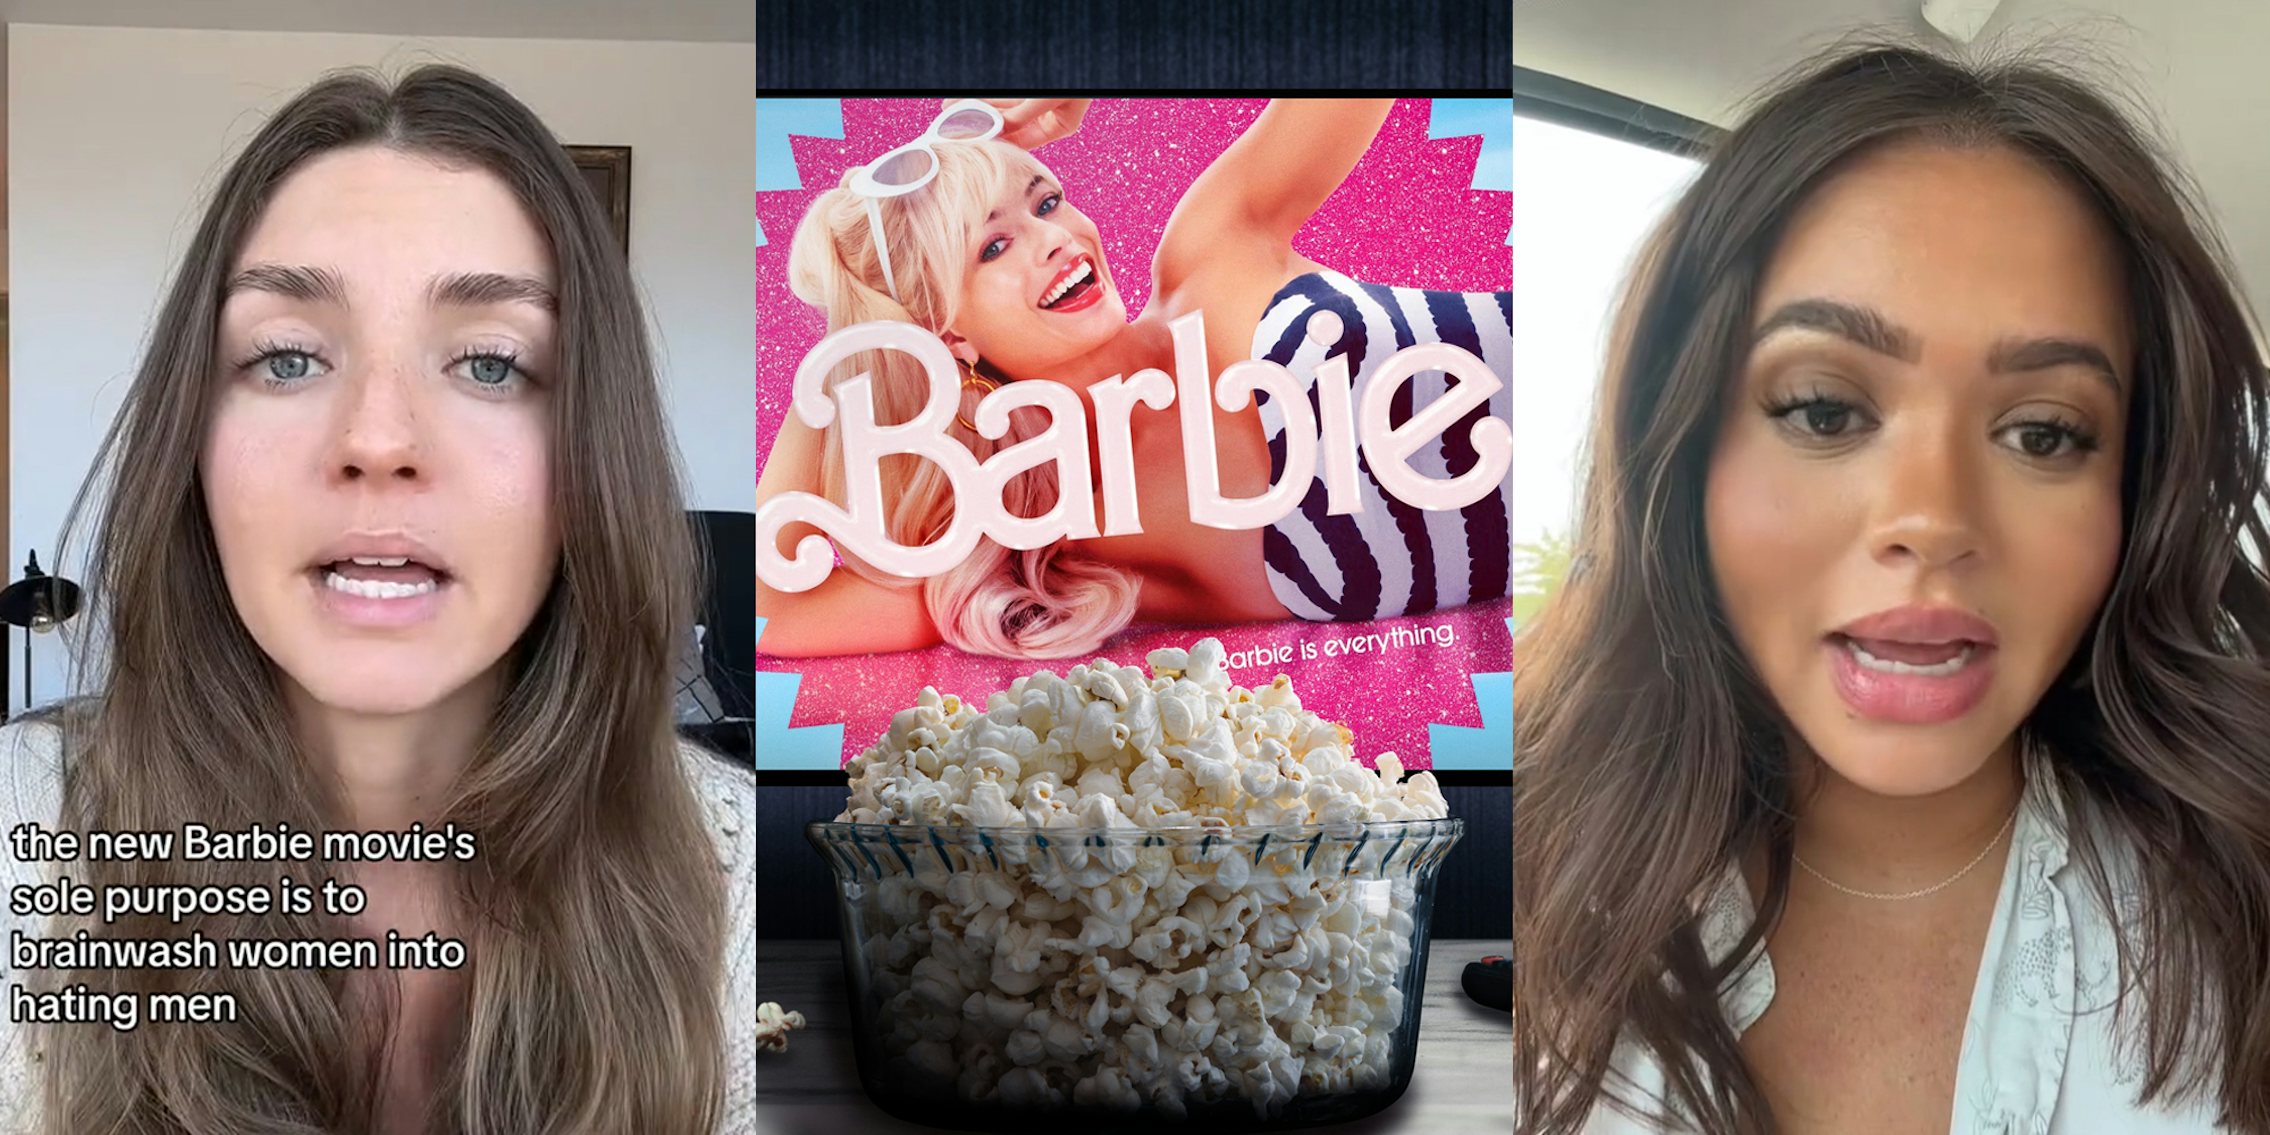 woman speaking with caption 'the new Barbie movie's sole purpose is to brainwash women into hating men' (l) Barbie movie on TV in front of bowl of popcorn on coffee table (c) woman speaking (r)